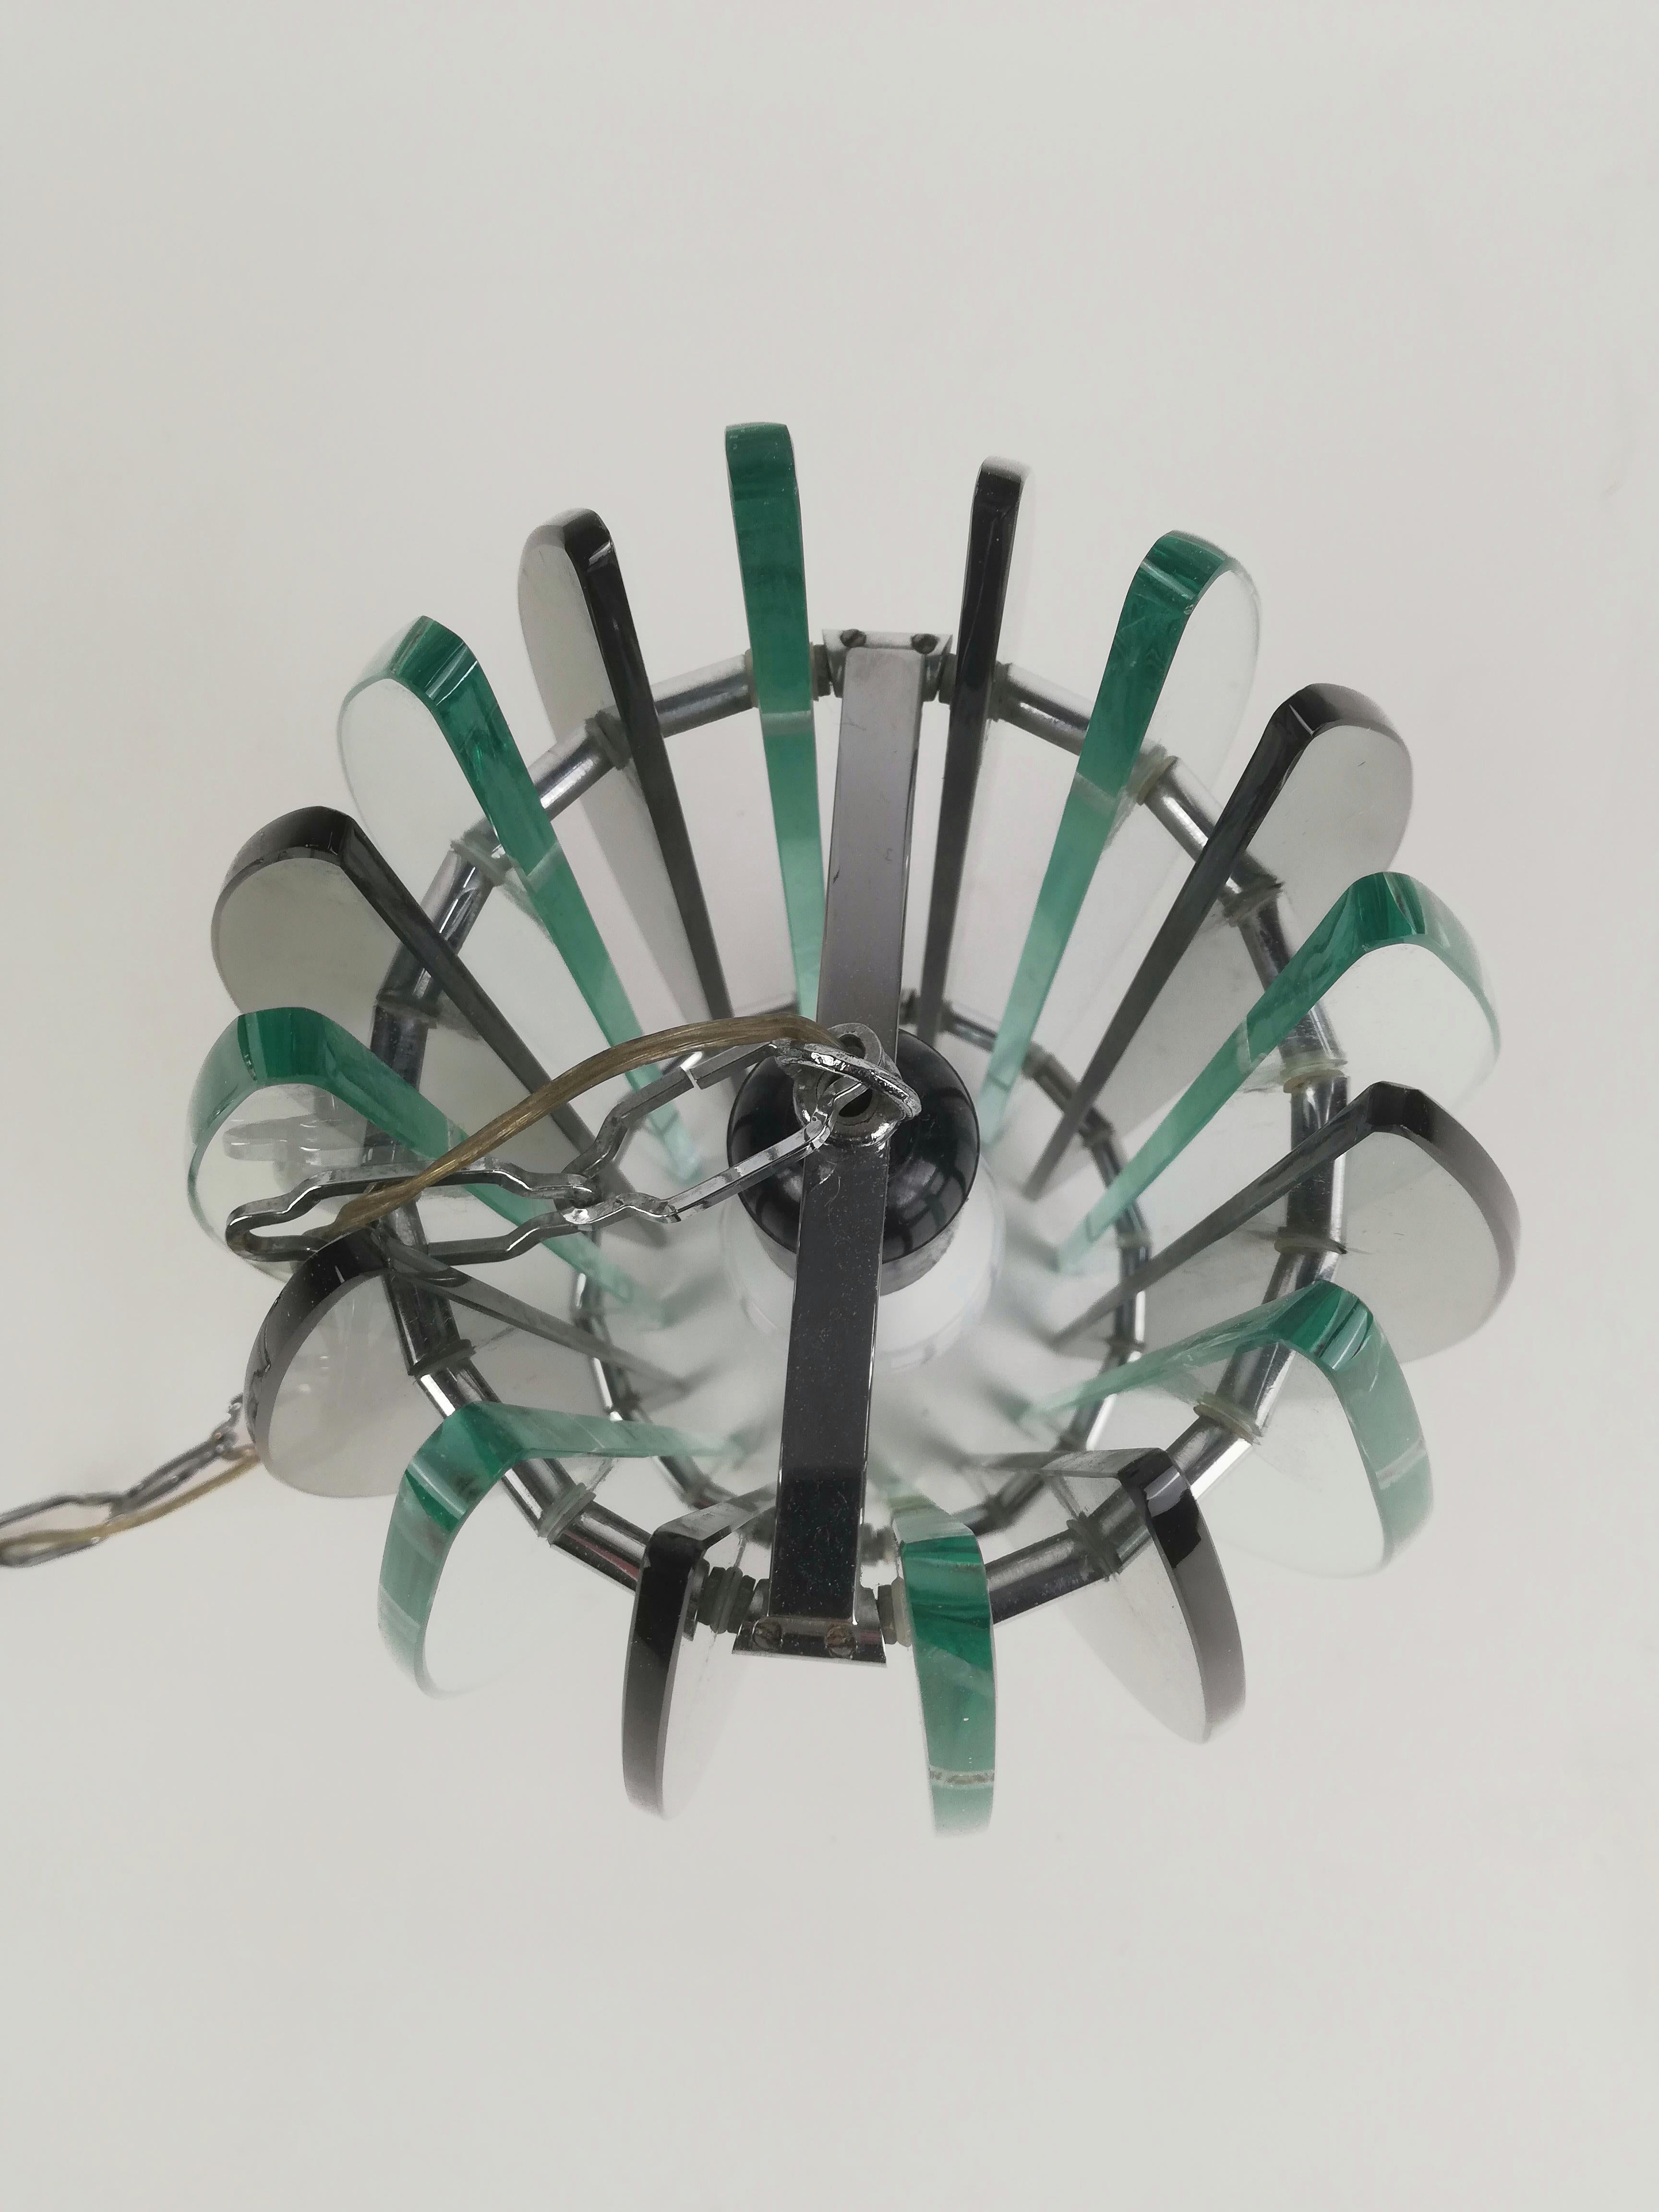 Italian Mid-Century Modern Chandelier by Veca in Fumè and Turquoise Glass For Sale 5